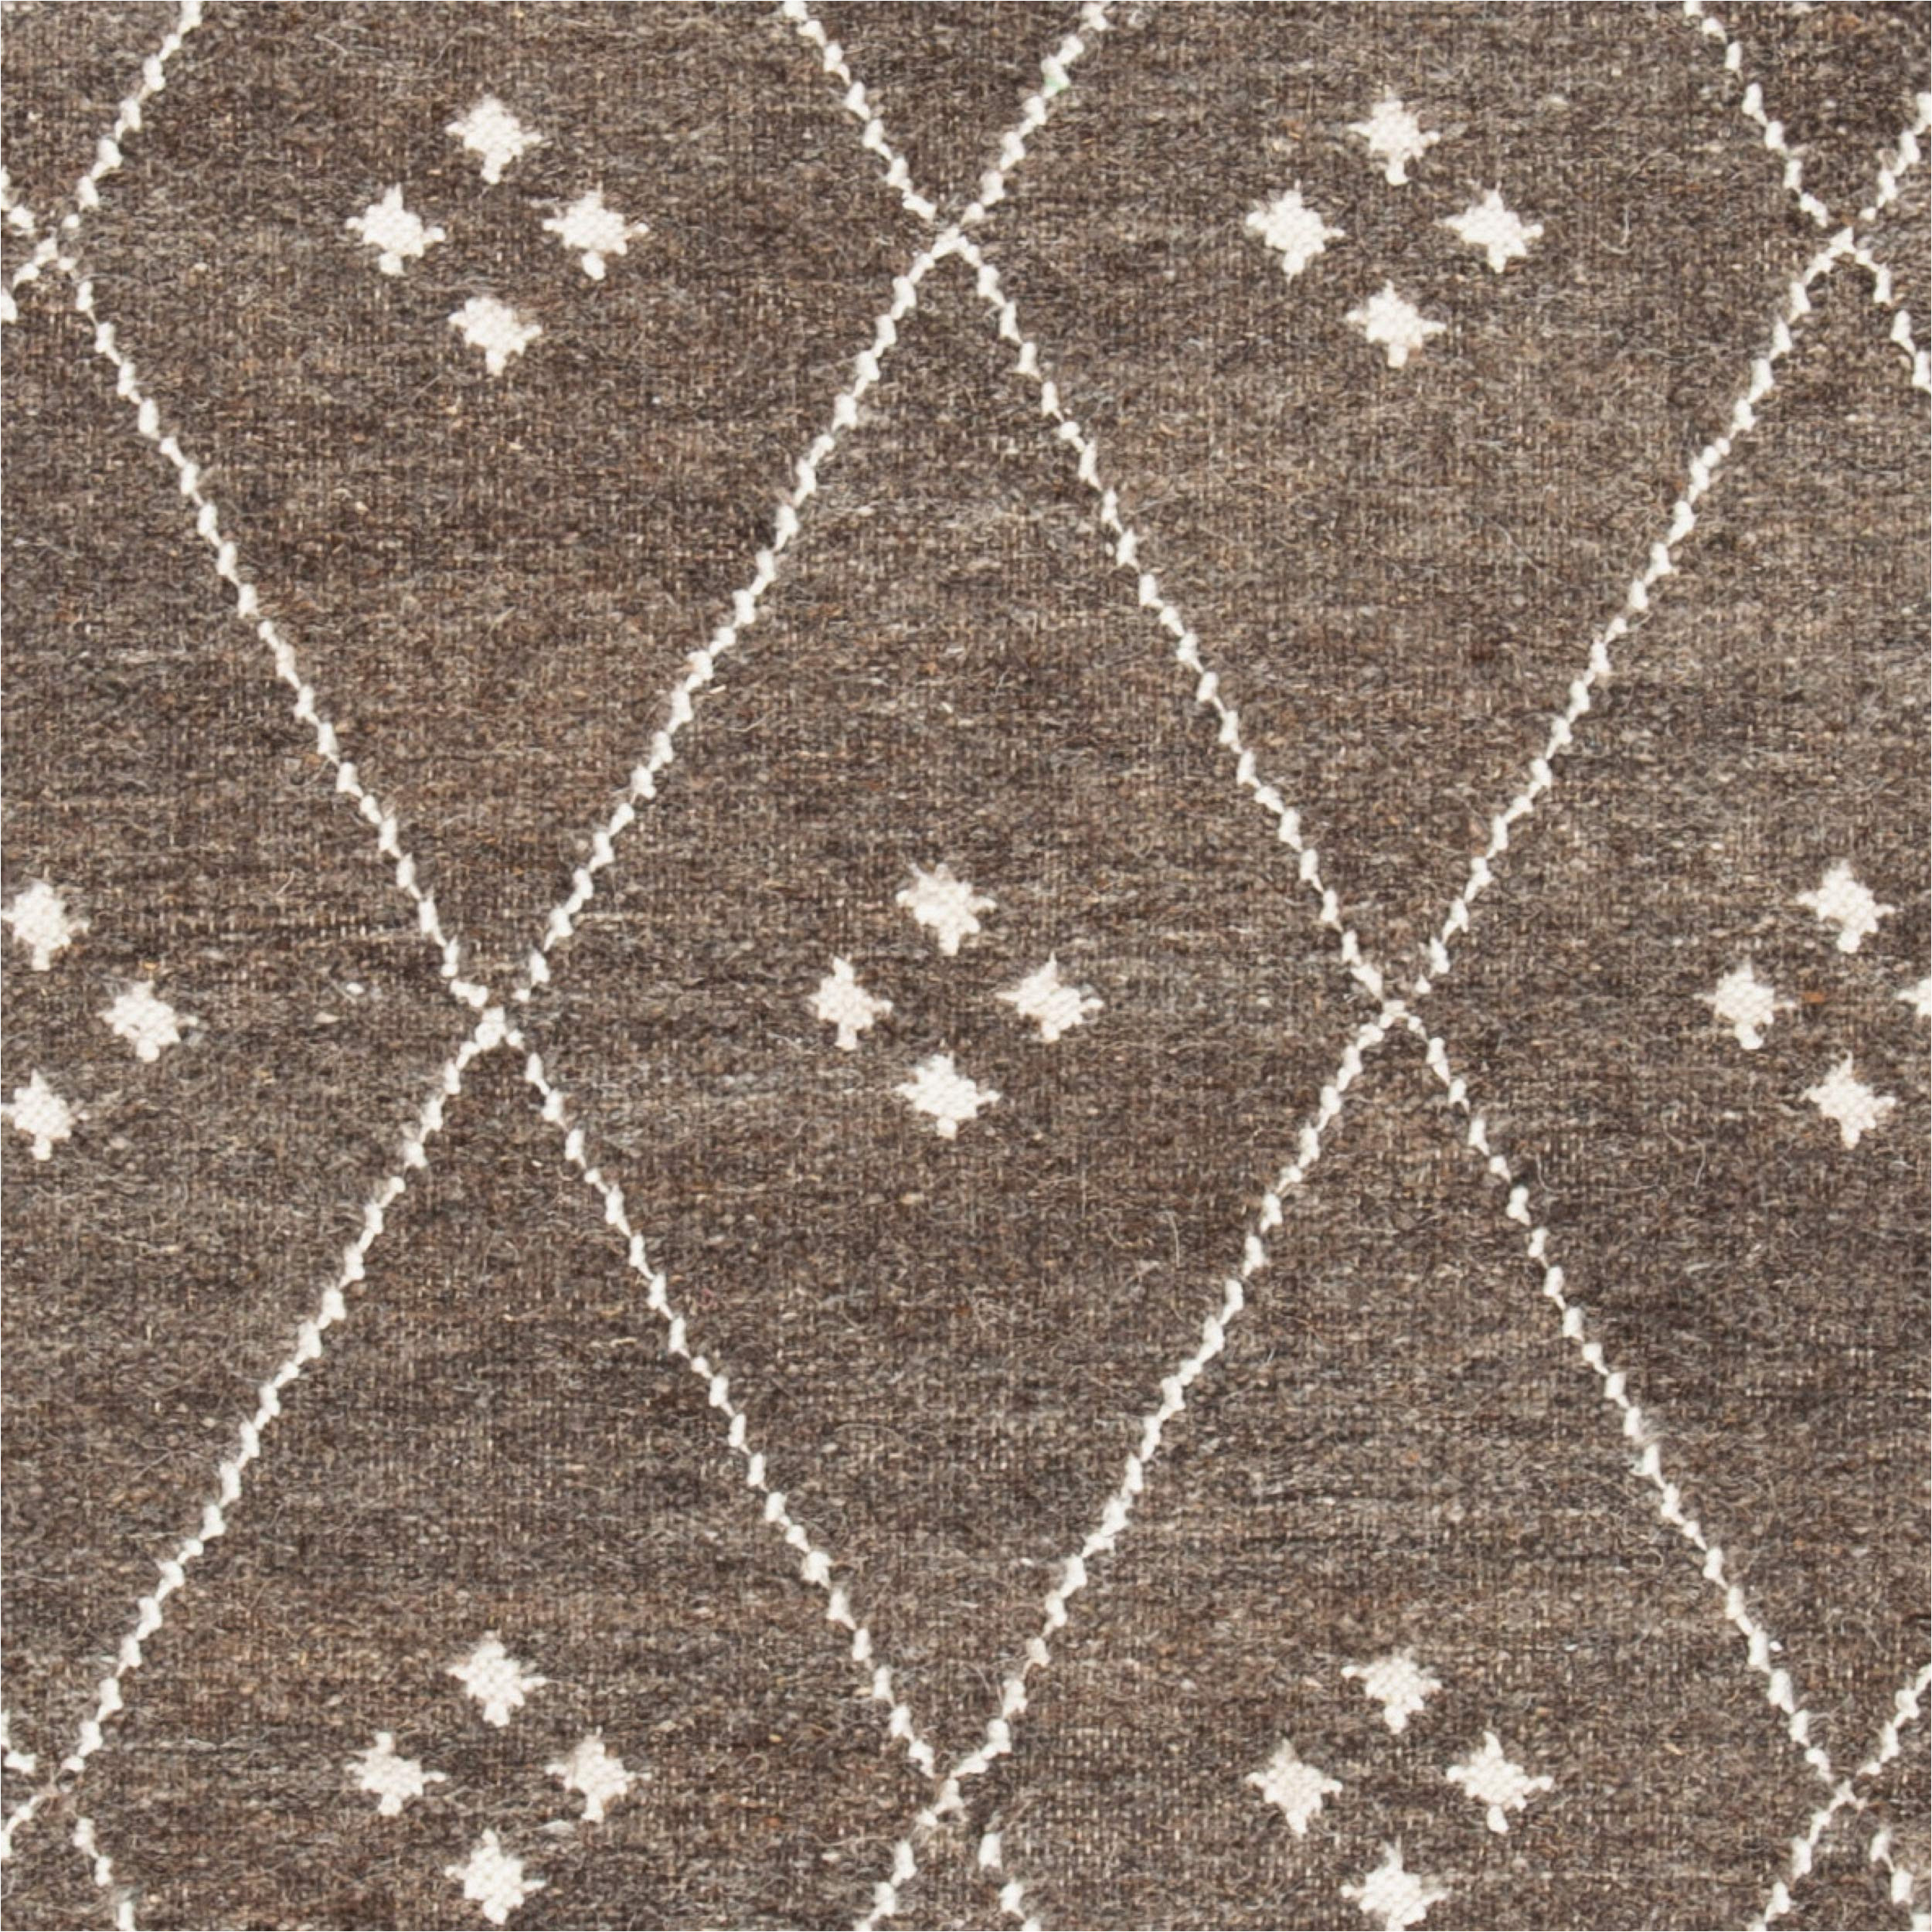 Aldergrove Handwoven Wool Natural Ivory area Rug Safavieh Natural Kilim Collection 8′ X 10′ Brown / Ivory Nkm316a Handmade Moroccan Boho Tribal Wool & Viscose area Rug